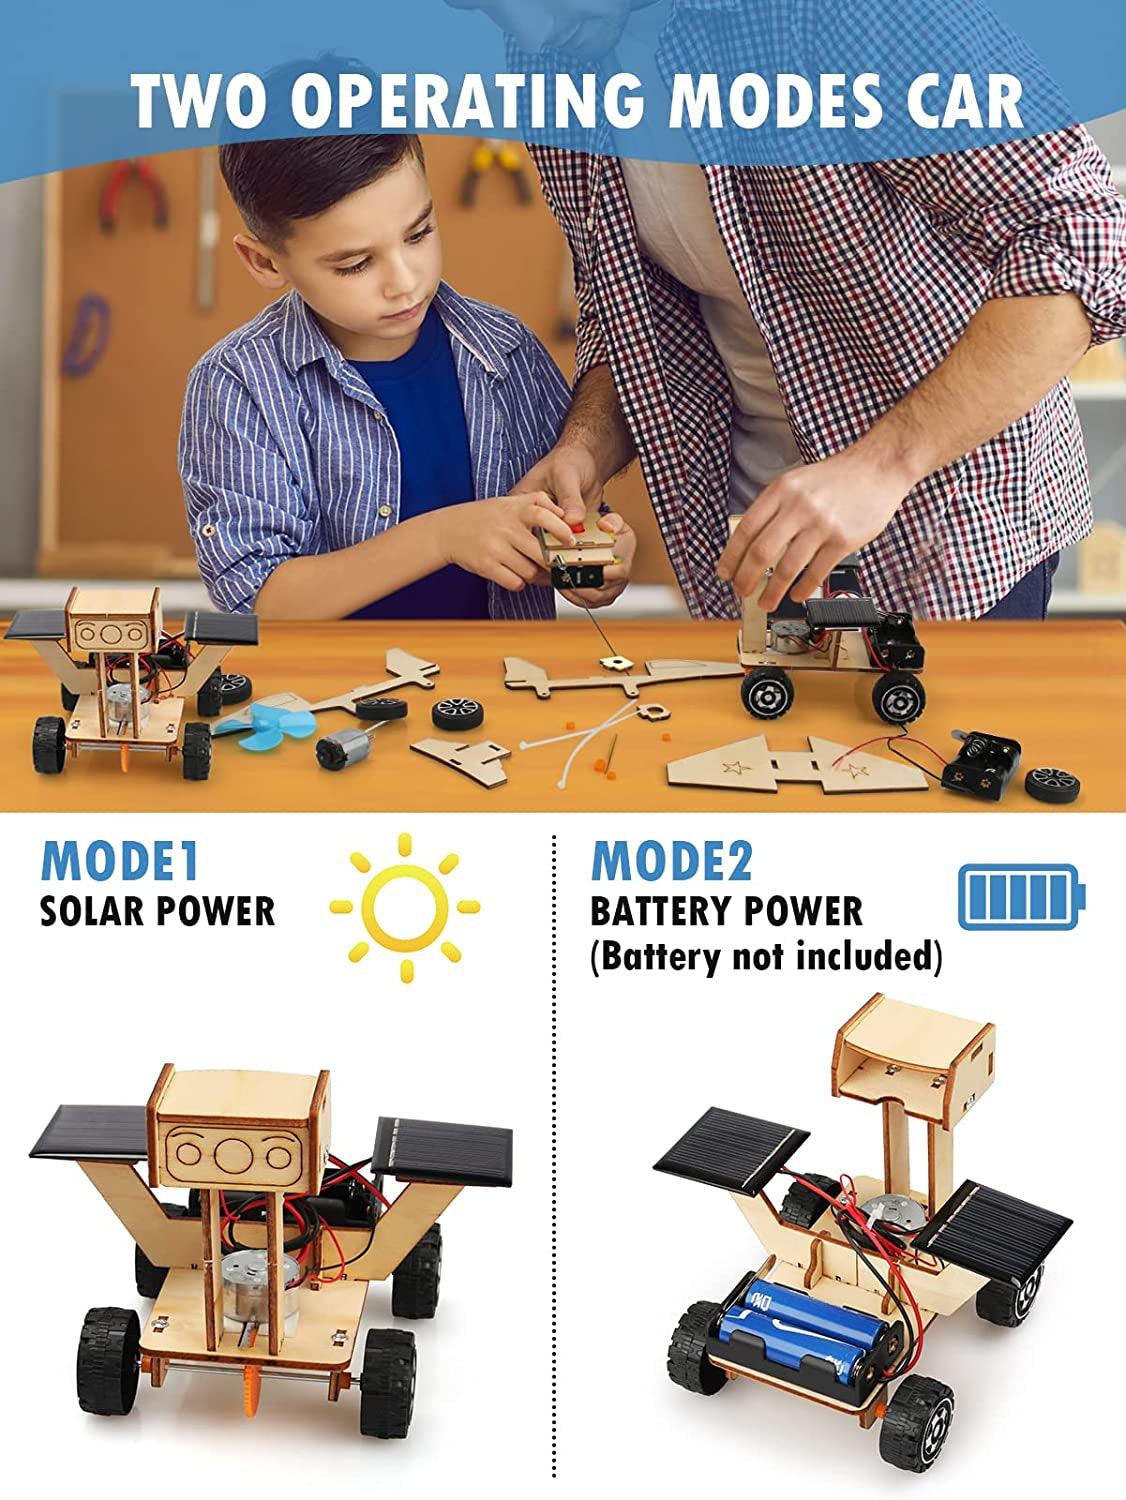 5 in 1 Model Car Kits, STEM Projects 3D Wooden Puzzles, Educational Science Experiment Building Set, DIY STEM Solar Toys - WoodArtSupply